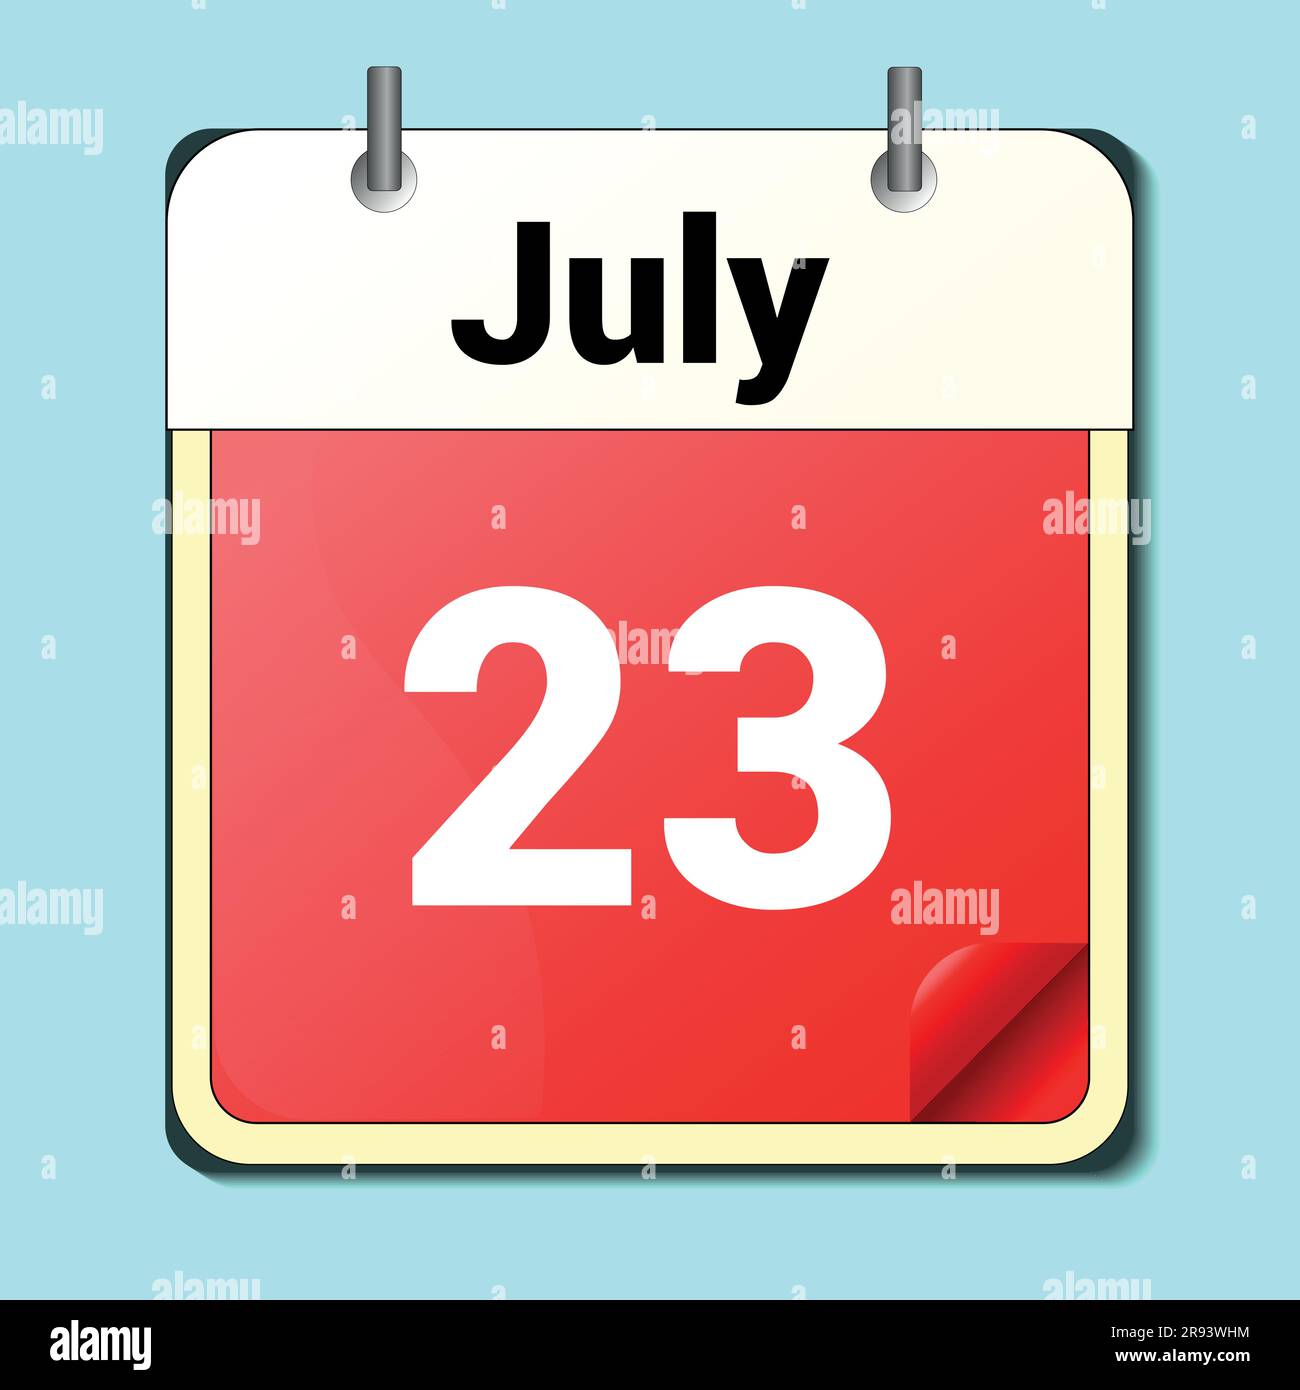 day on the calendar, vector image format, June 23 Stock Vector